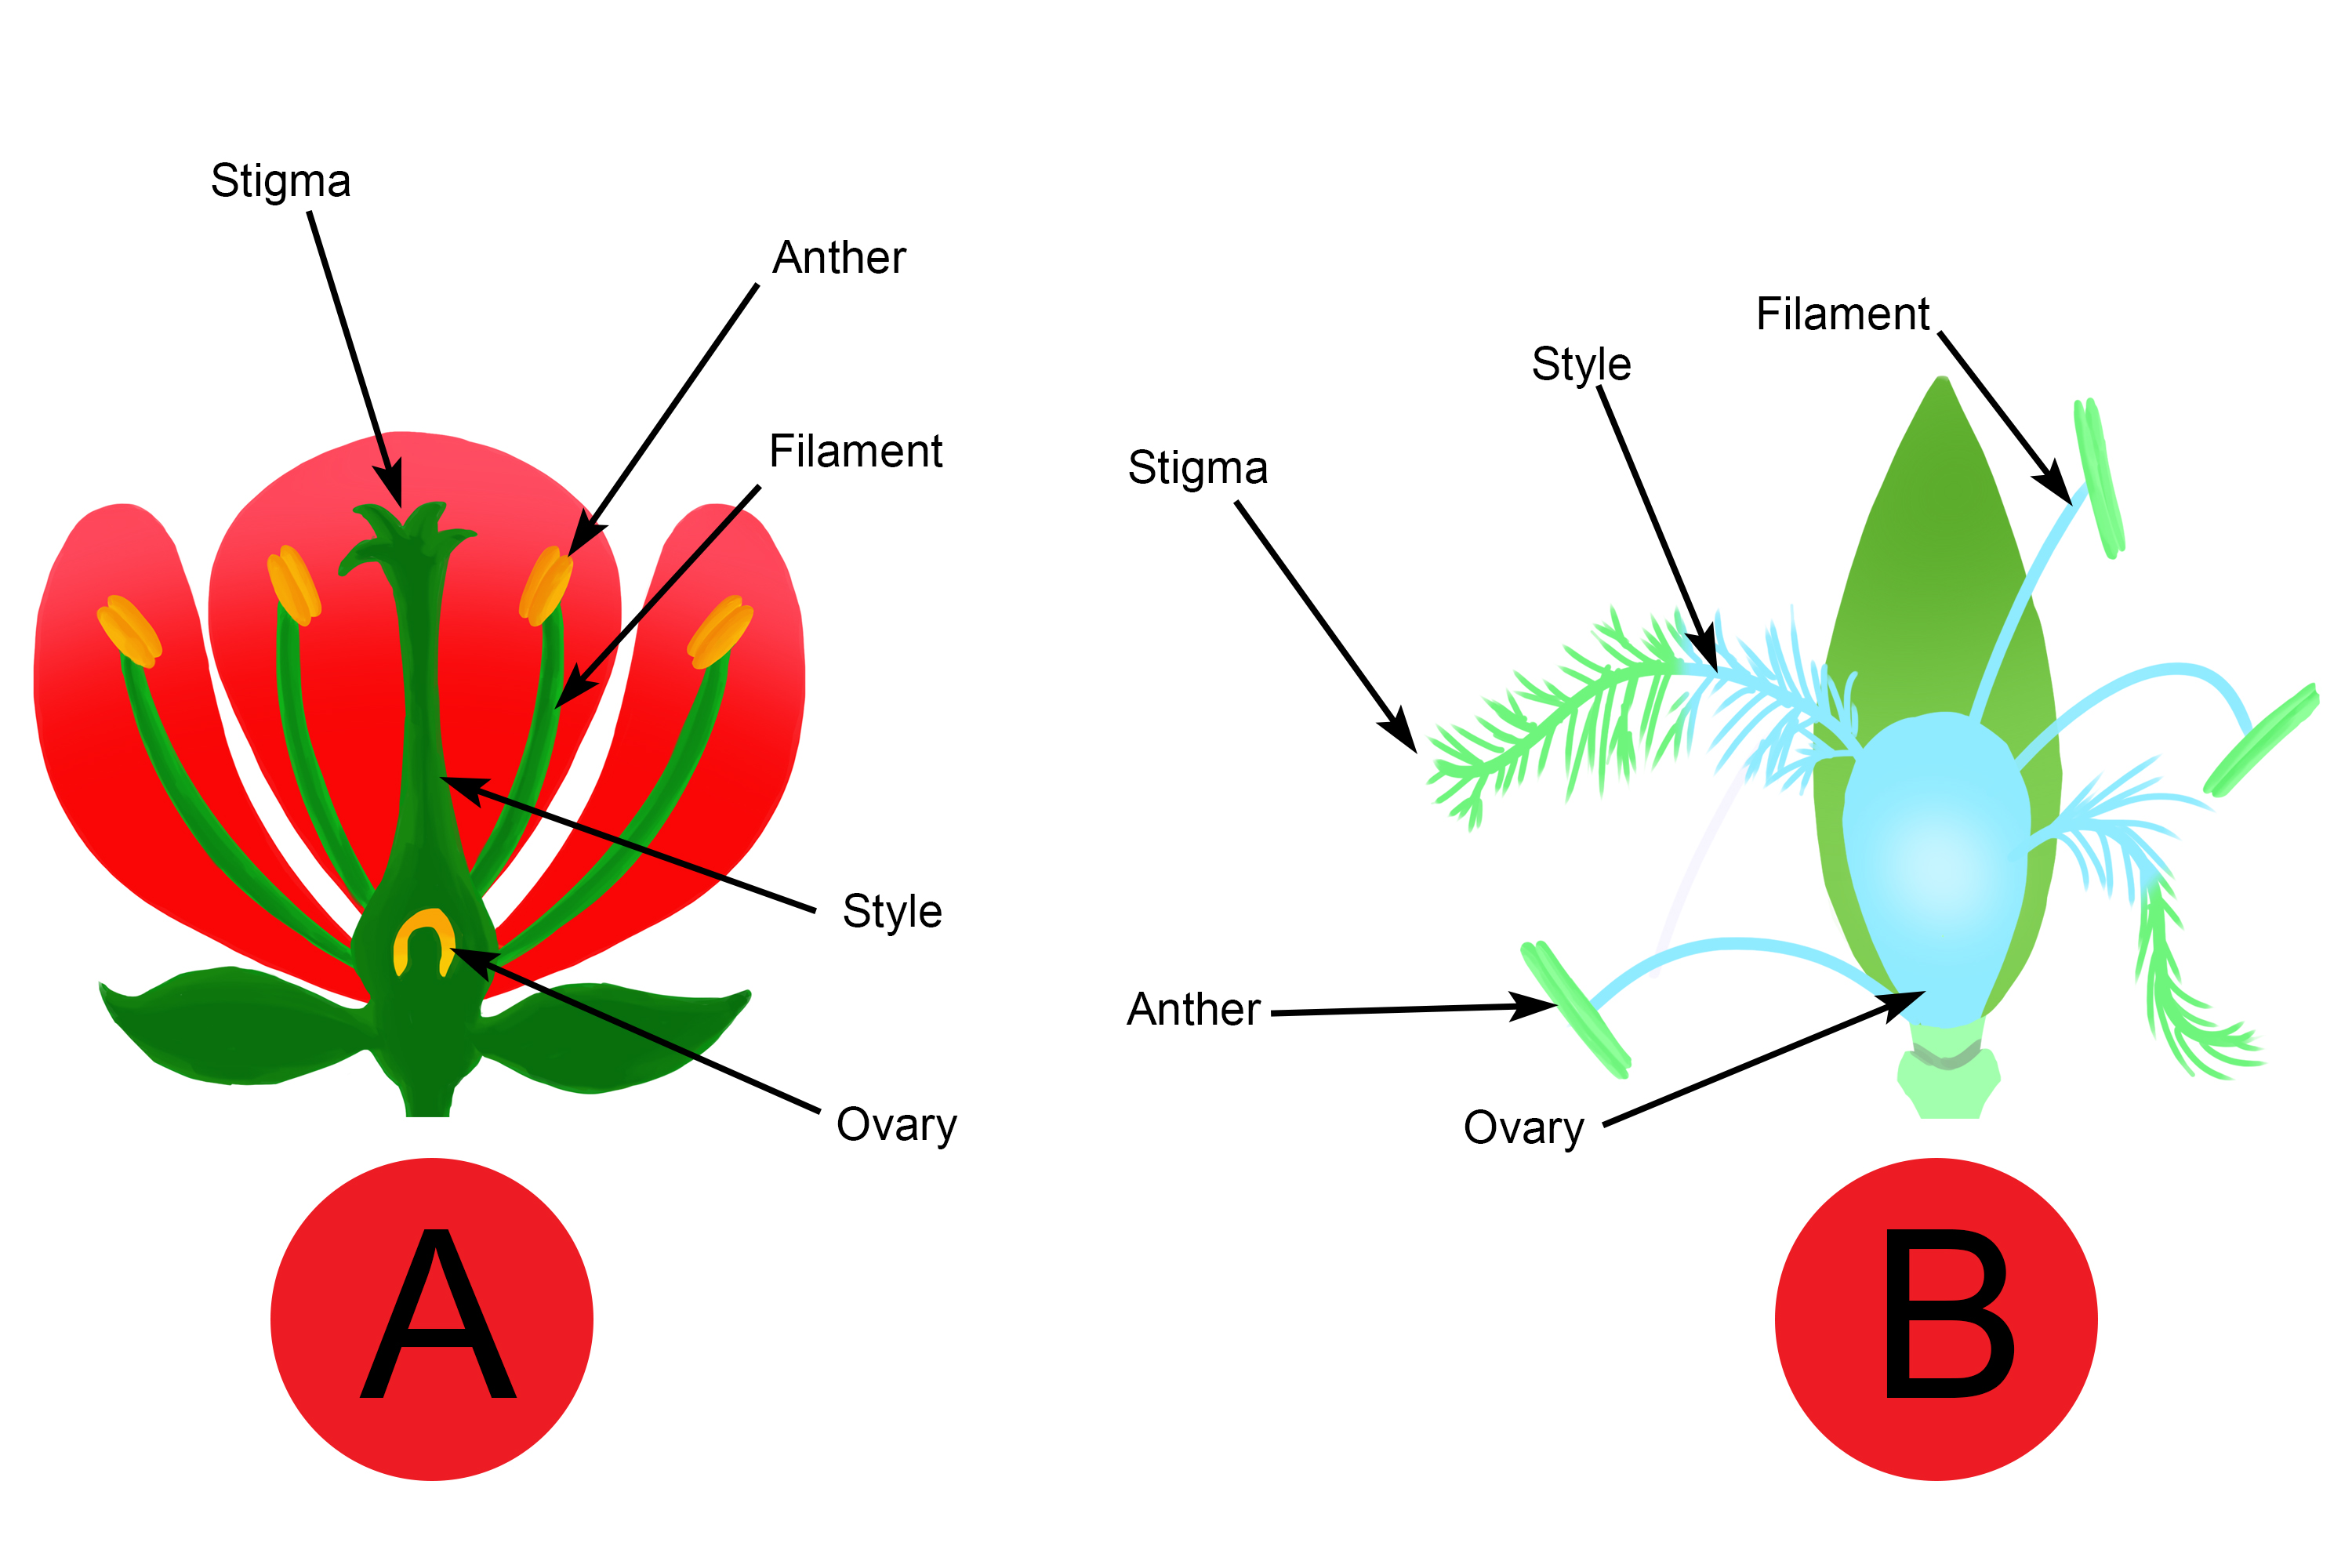 Diagram containing 2 different types of plant, which one is best pollinated by insects?